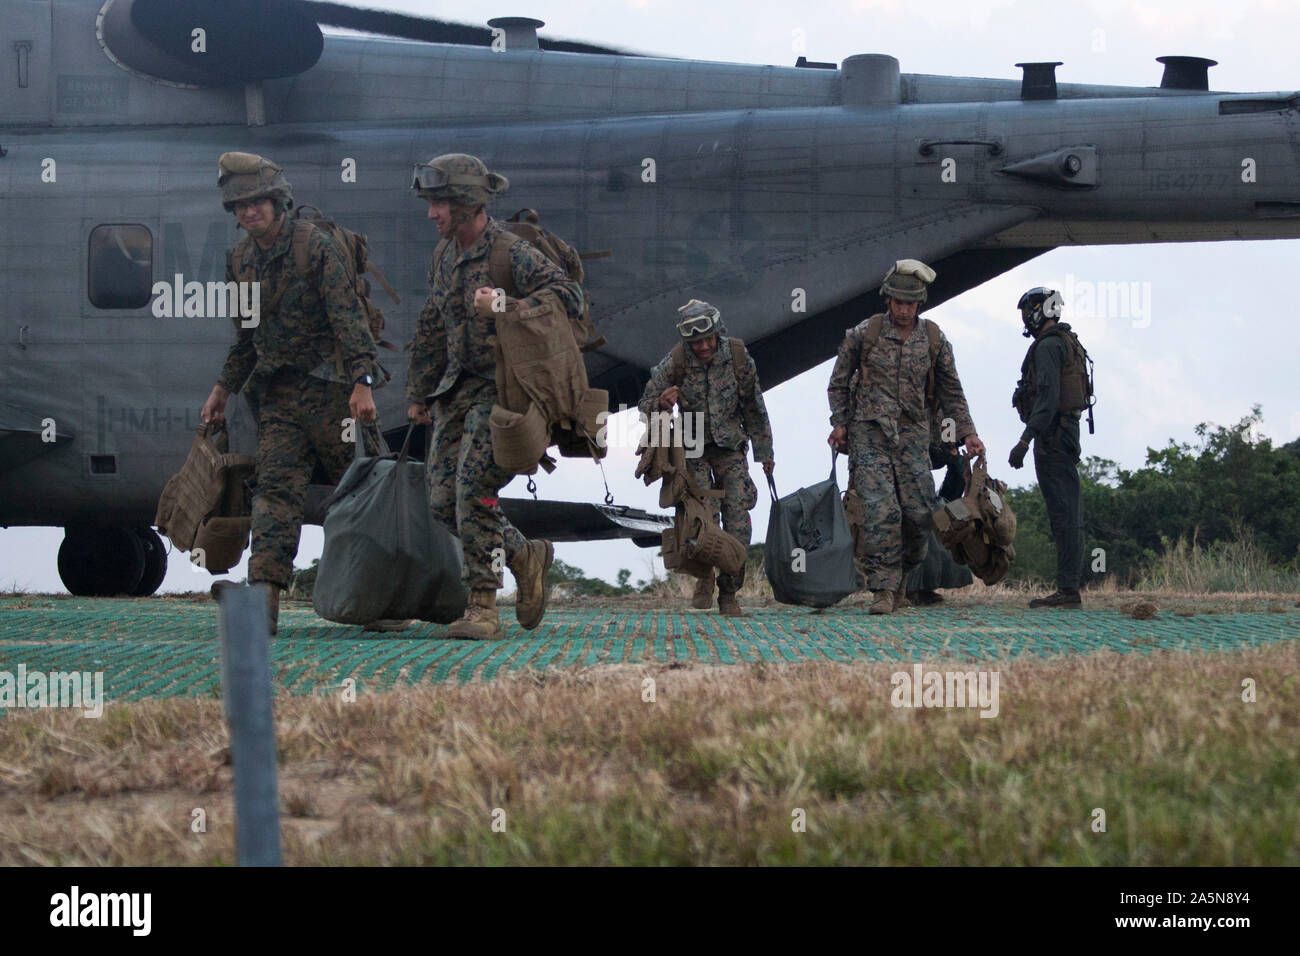 Marines with Combat Logistics Battalion 31, 31st Marine Expeditionary Unit, exit a CH-53E Super Stallion during a helicopter support team training exercise, Northern Training Area, Okinawa, Japan, Oct. 11, 2019. Helicopter Support Teams hook up external loads to helicopters for transportation in areas not suitable for vehicles, making them useful for resupply missions to maneuver forces on the ground. The 31st MEU, the Marine Corps’ only continuously forward-deployed MEU, provides a flexible and lethal force ready to perform a wide range of military operations as the premier crisis response fo Stock Photo